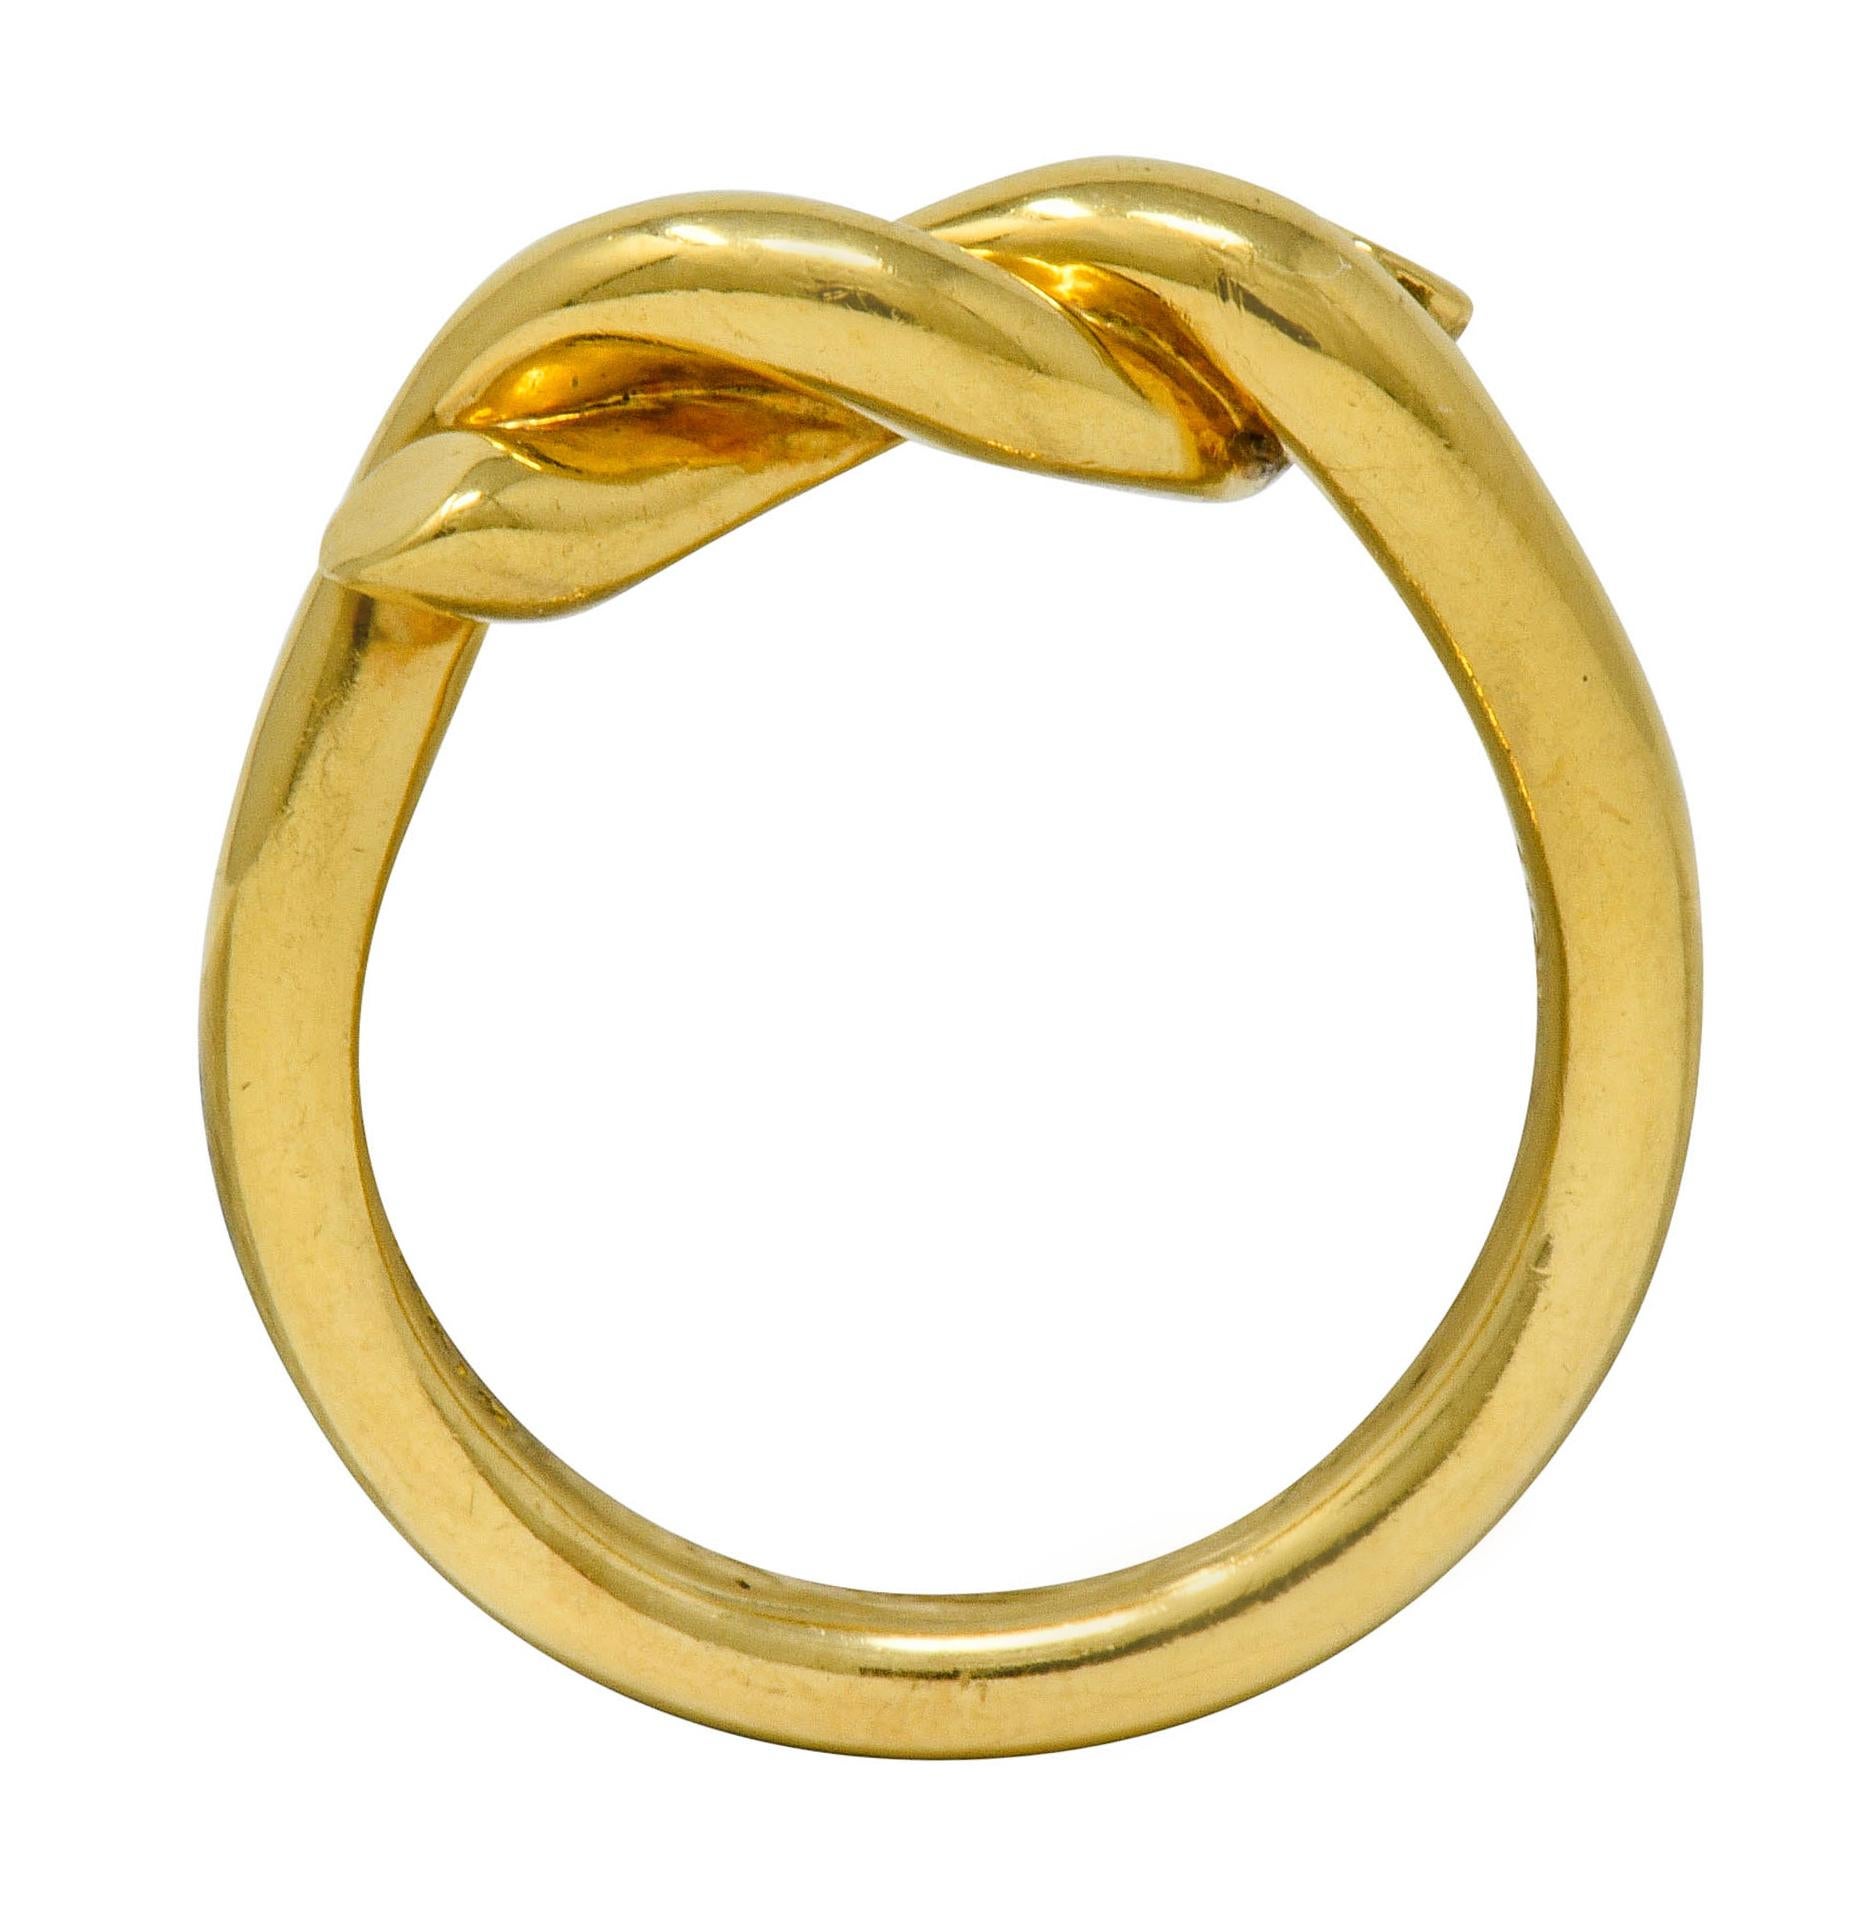 Tiffany & Co. 1980s Vintage 18 Karat Gold Twisted Knot Band Ring 1